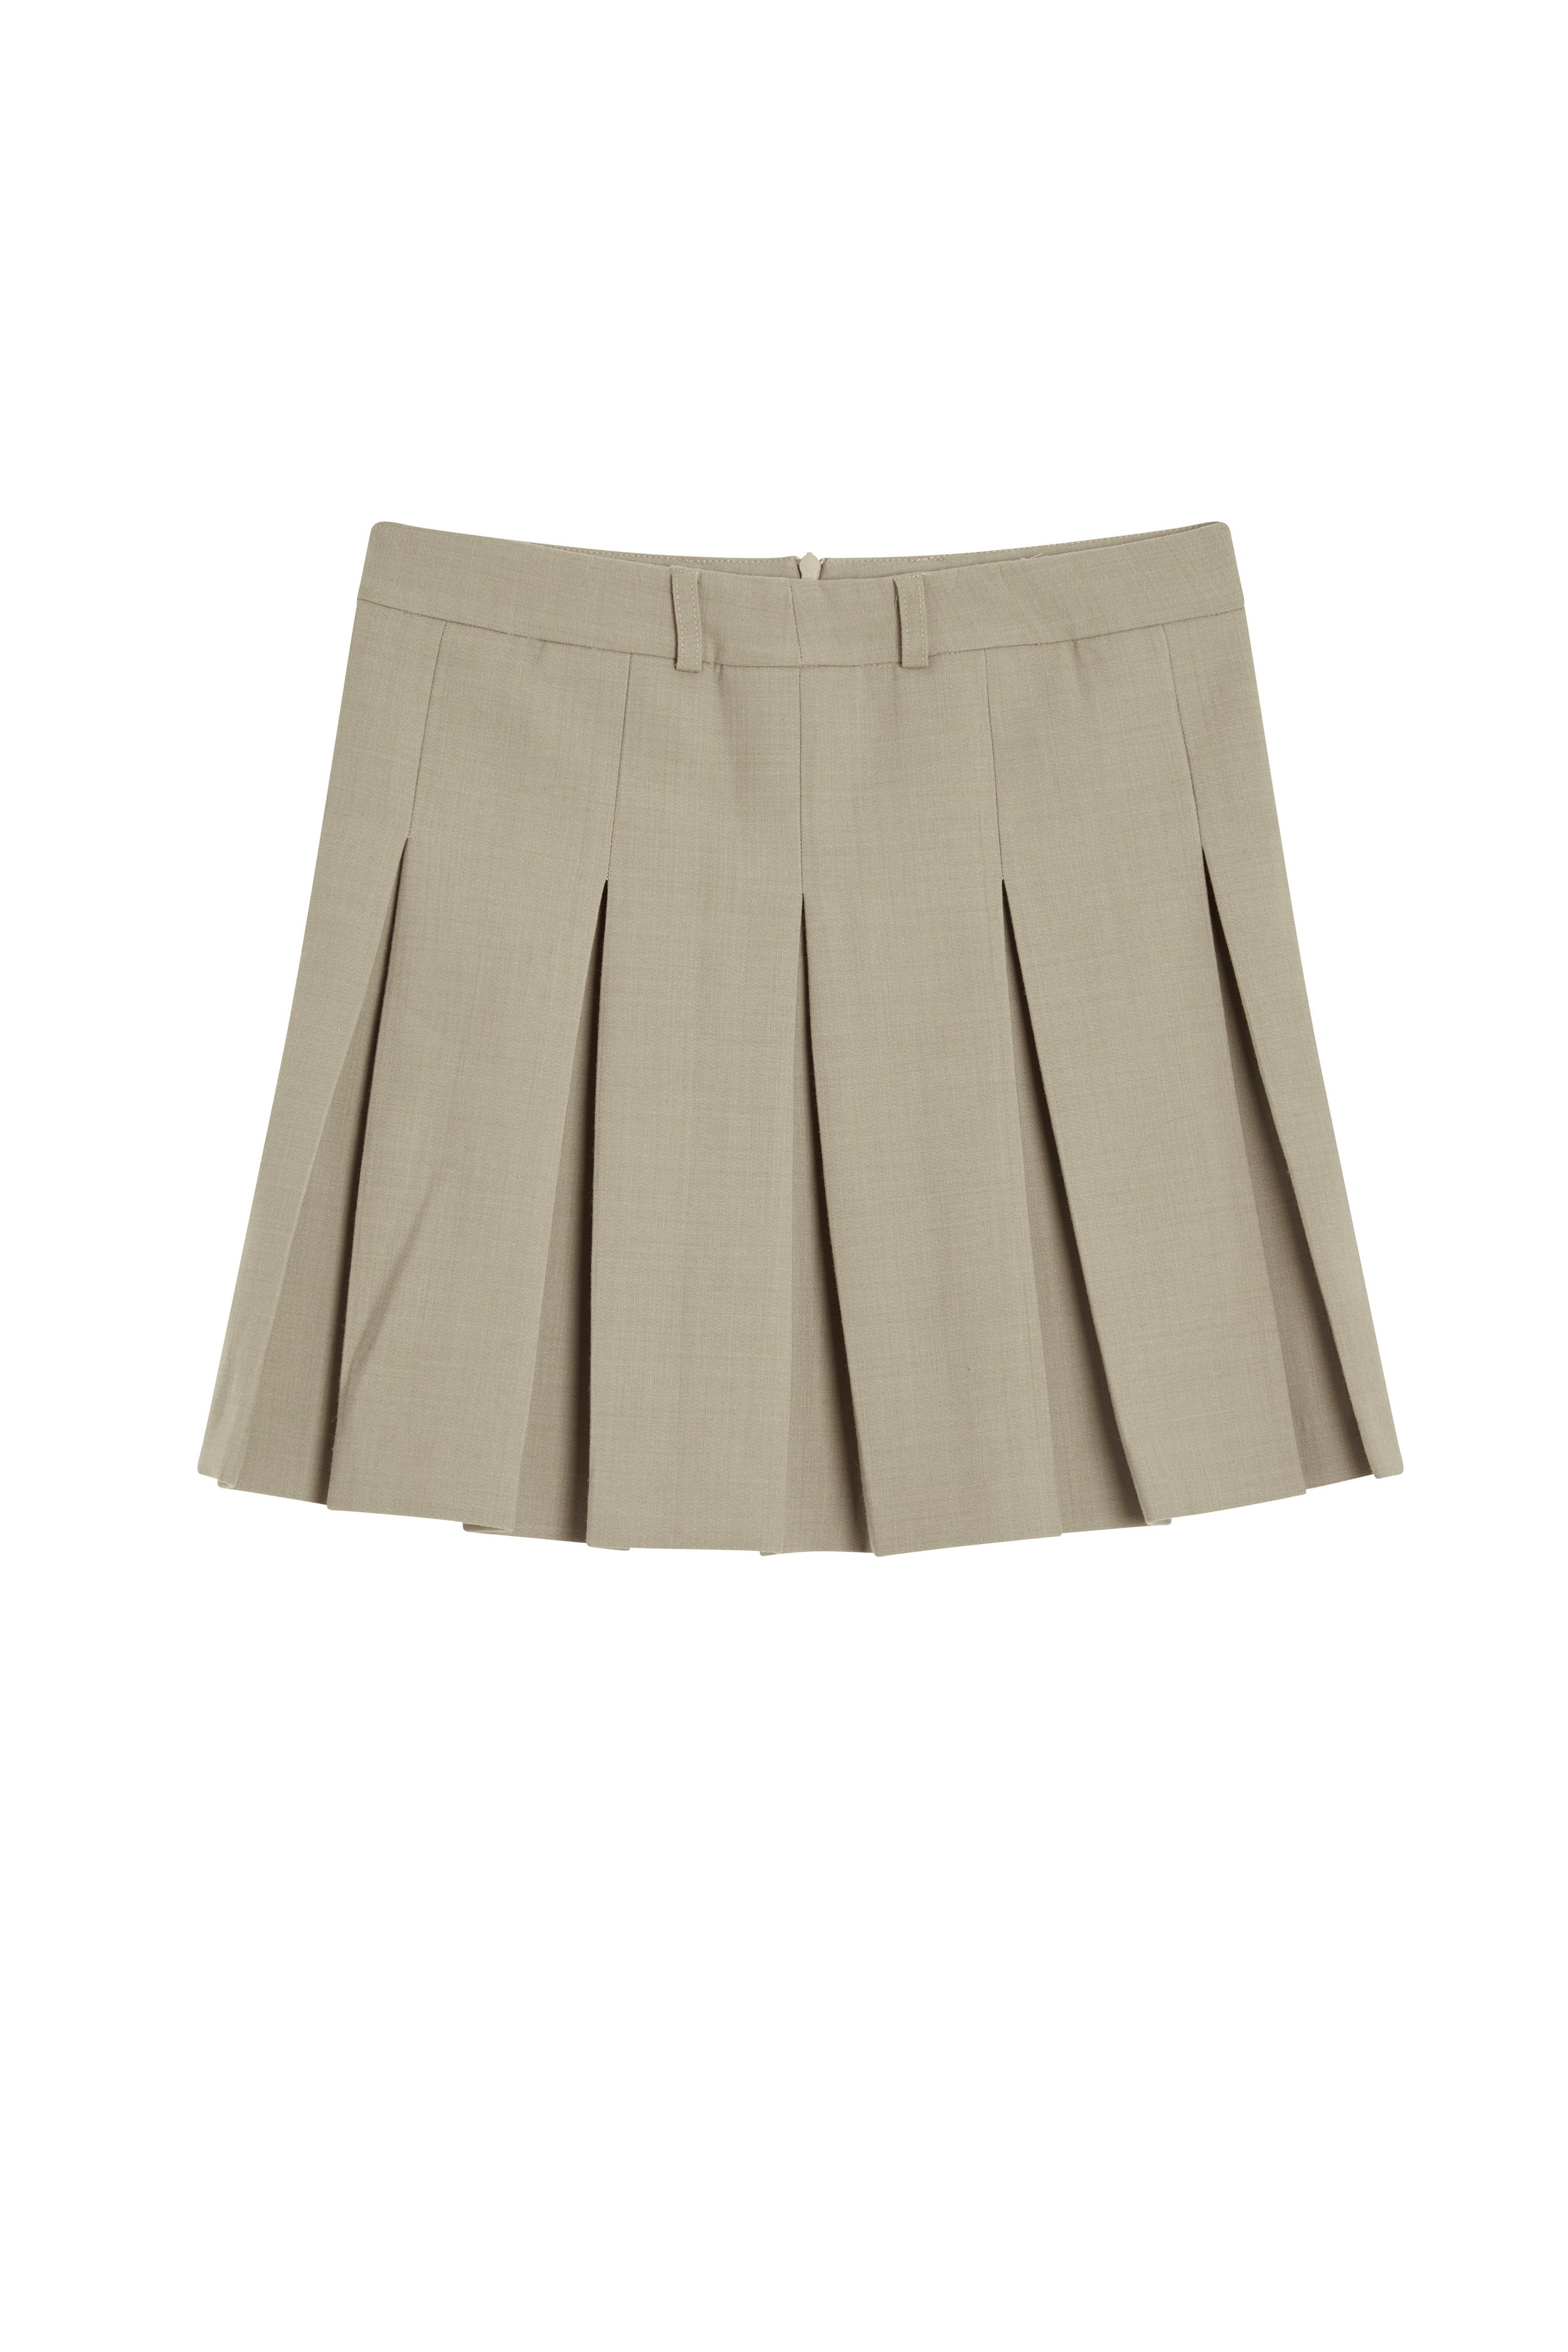 Le Jason - The Iconic Pleated Mini-Skirt Inspired from the Runway ...